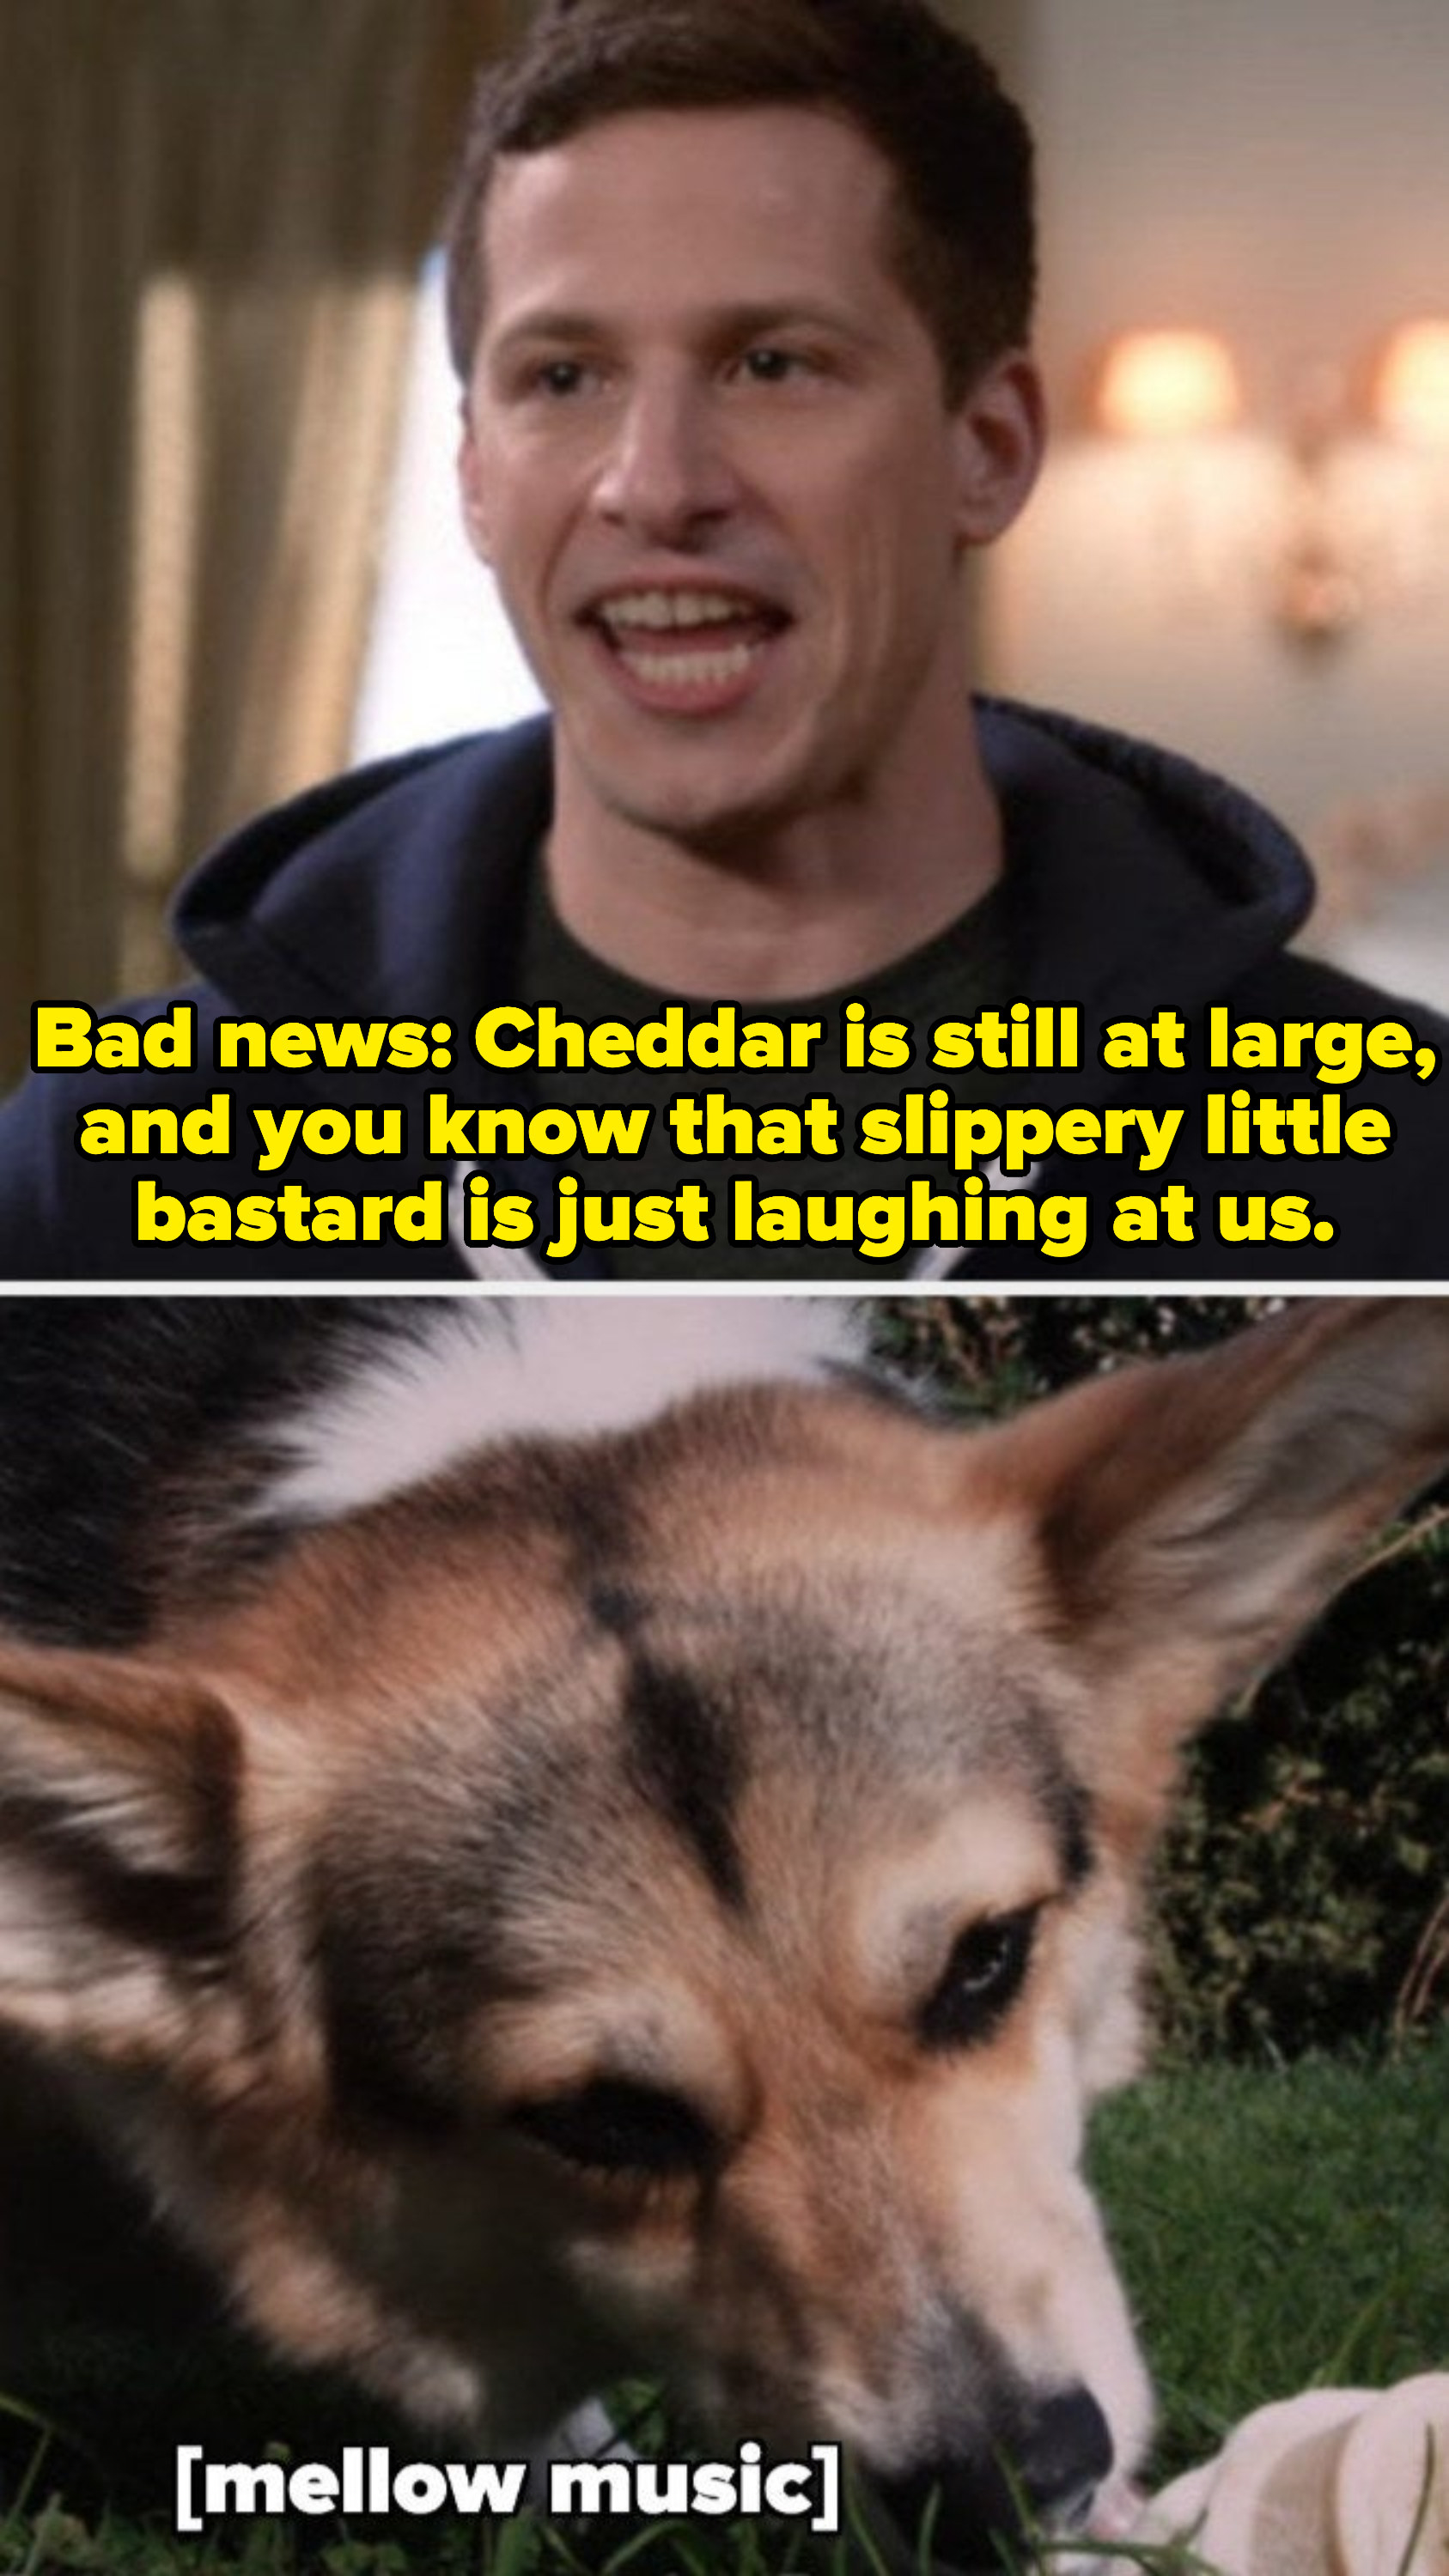 Jake to the 99: &quot;Bad news: Cheddar is still at large, and you know that slippery little bastard is just laughing at us&quot; Cut to Cheddar peacefully licking an ice cream cone